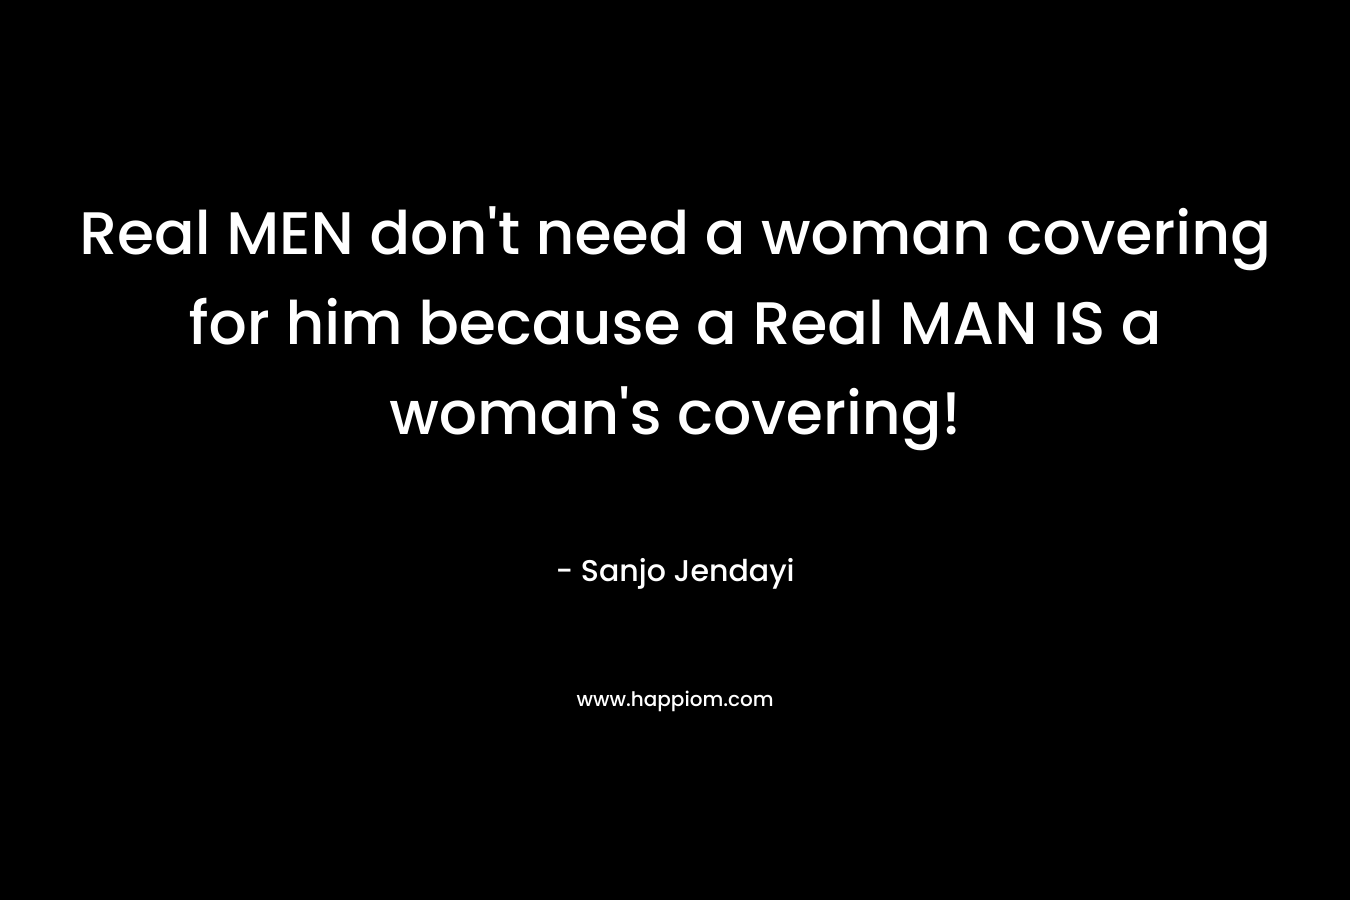 Real MEN don’t need a woman covering for him because a Real MAN IS a woman’s covering! – Sanjo Jendayi